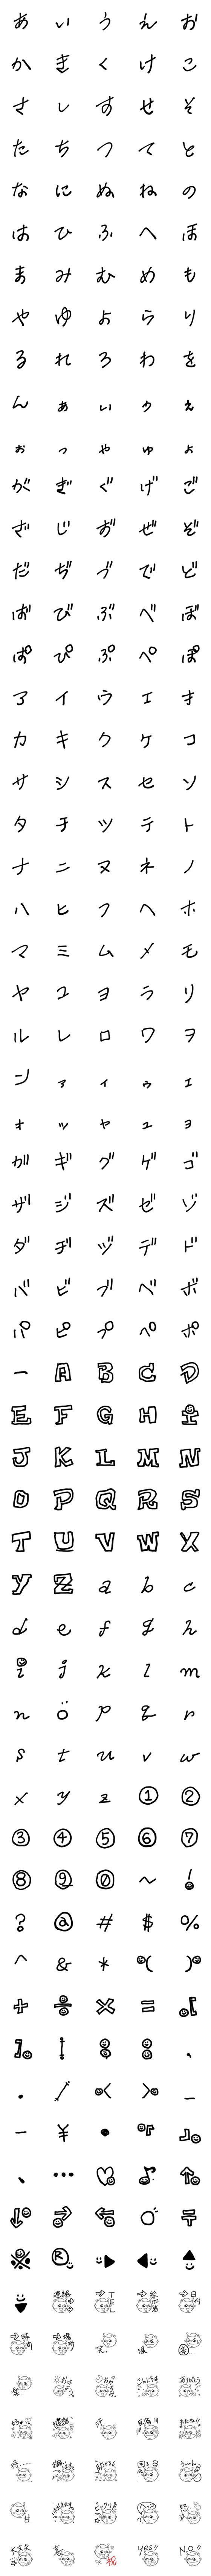 [LINE絵文字]ノートの落書き【文字＋絵文字】の画像一覧